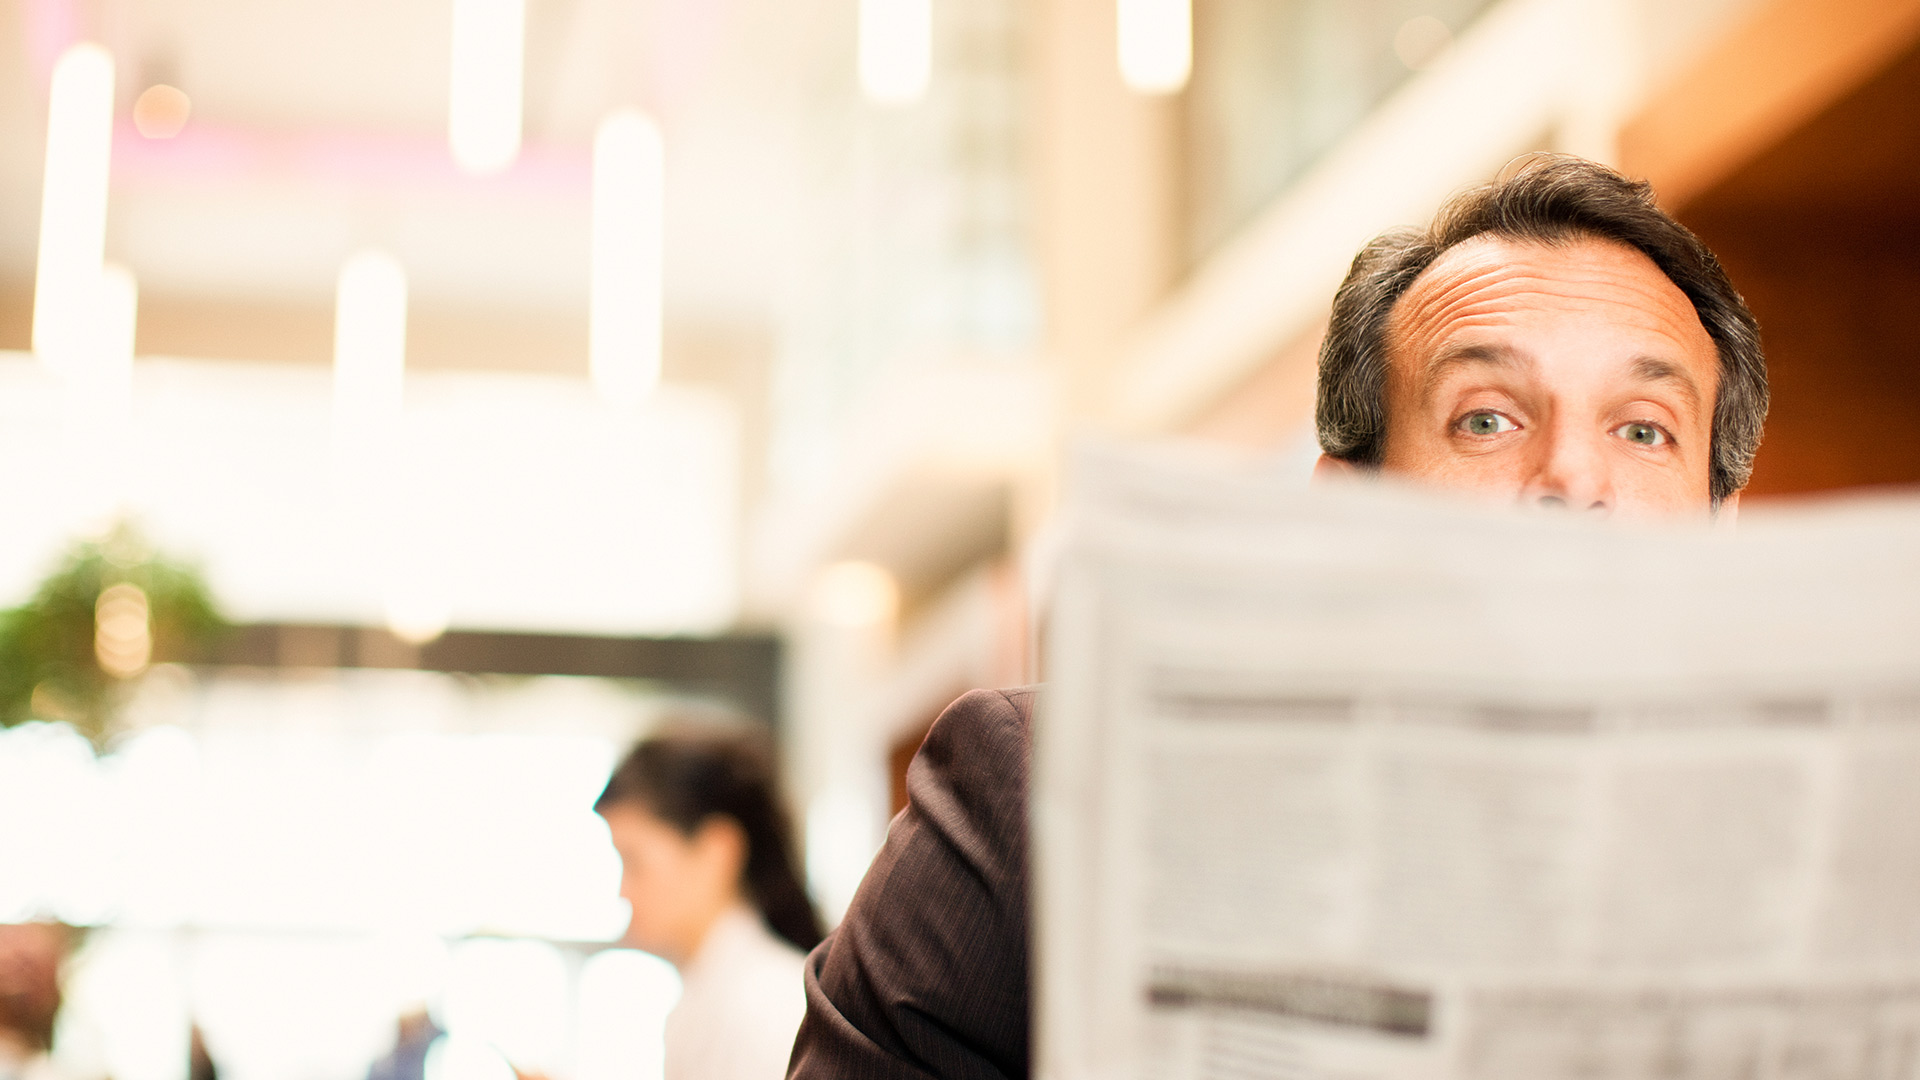 A man looks out from behind a newspaper.